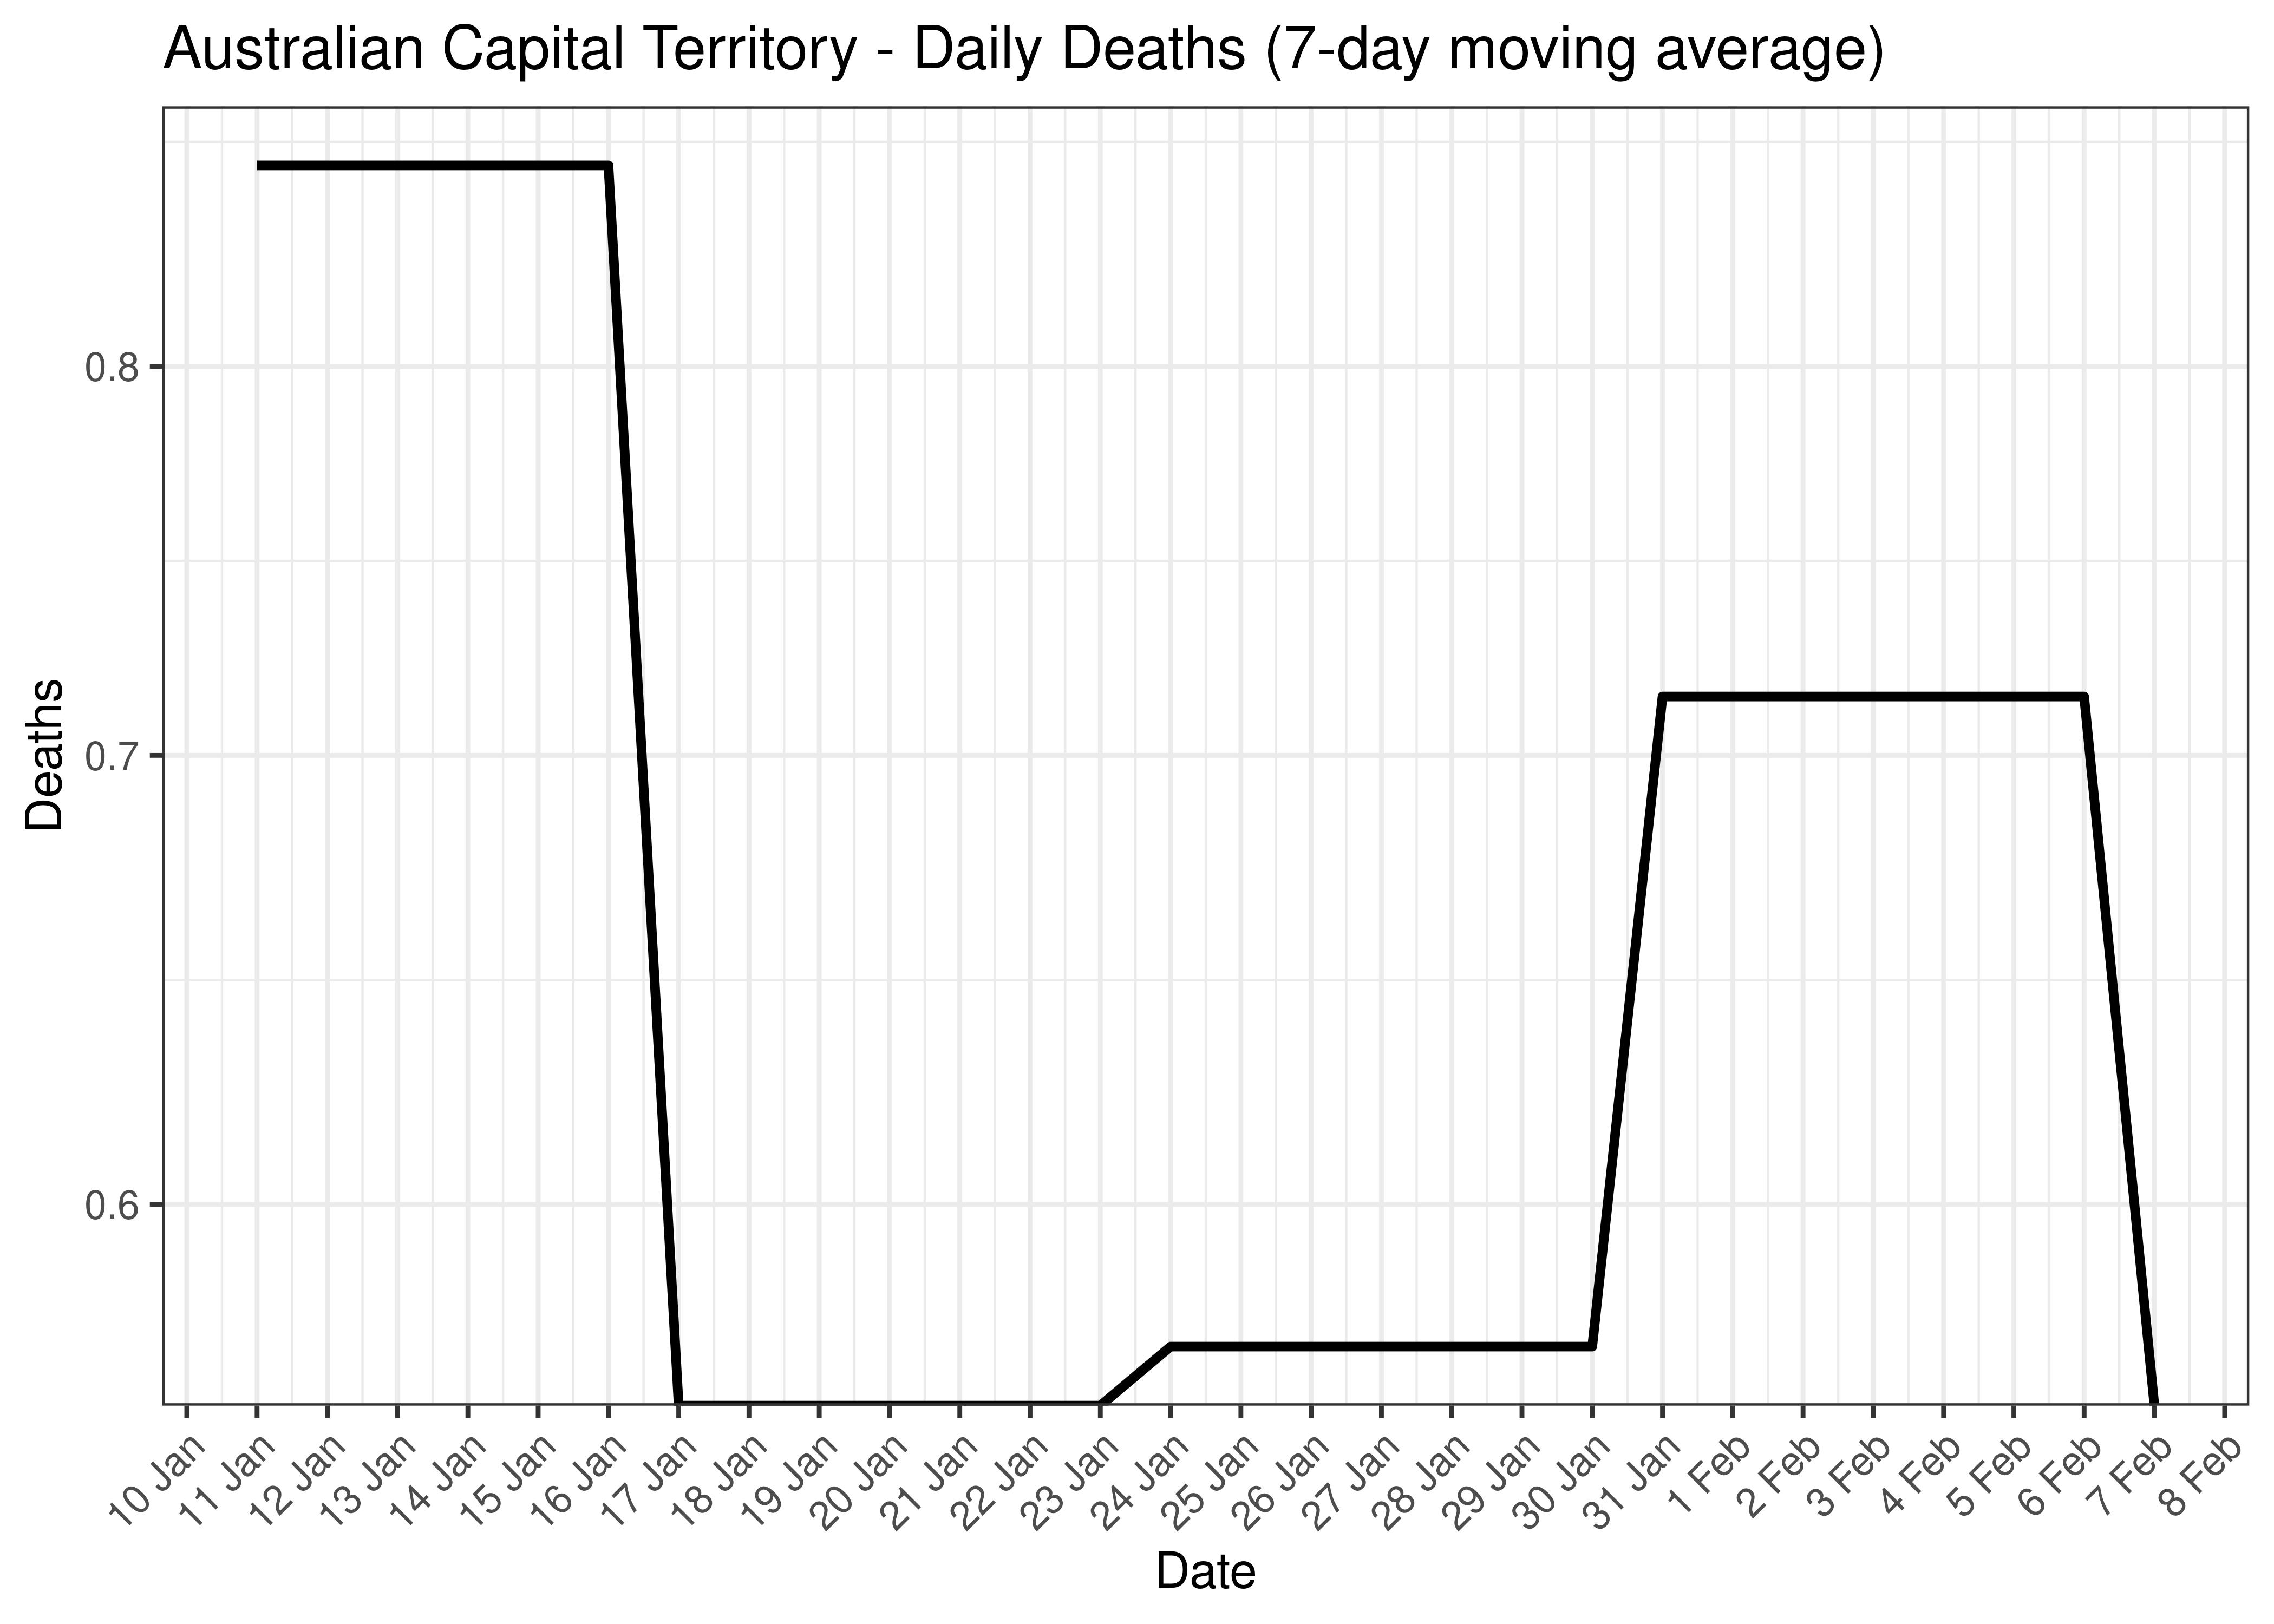 Australian Capital Territory - Daily Deaths for Last 30-days (7-day moving average)